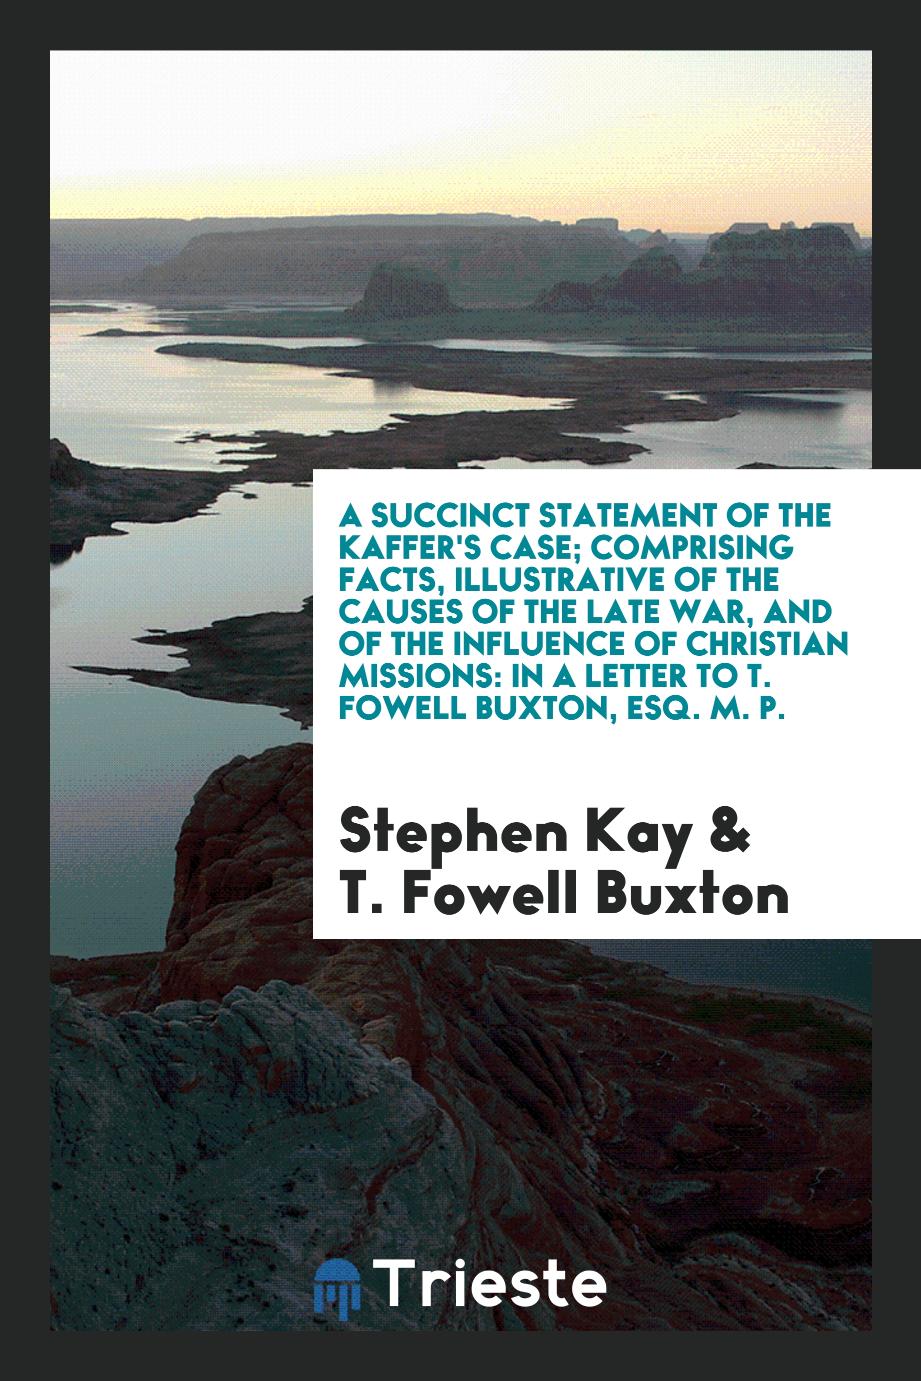 A Succinct Statement of the Kaffer's Case; Comprising Facts, Illustrative of the Causes of the Late War, and of the Influence of Christian Missions: In a Letter to T. Fowell Buxton, Esq. M. P.